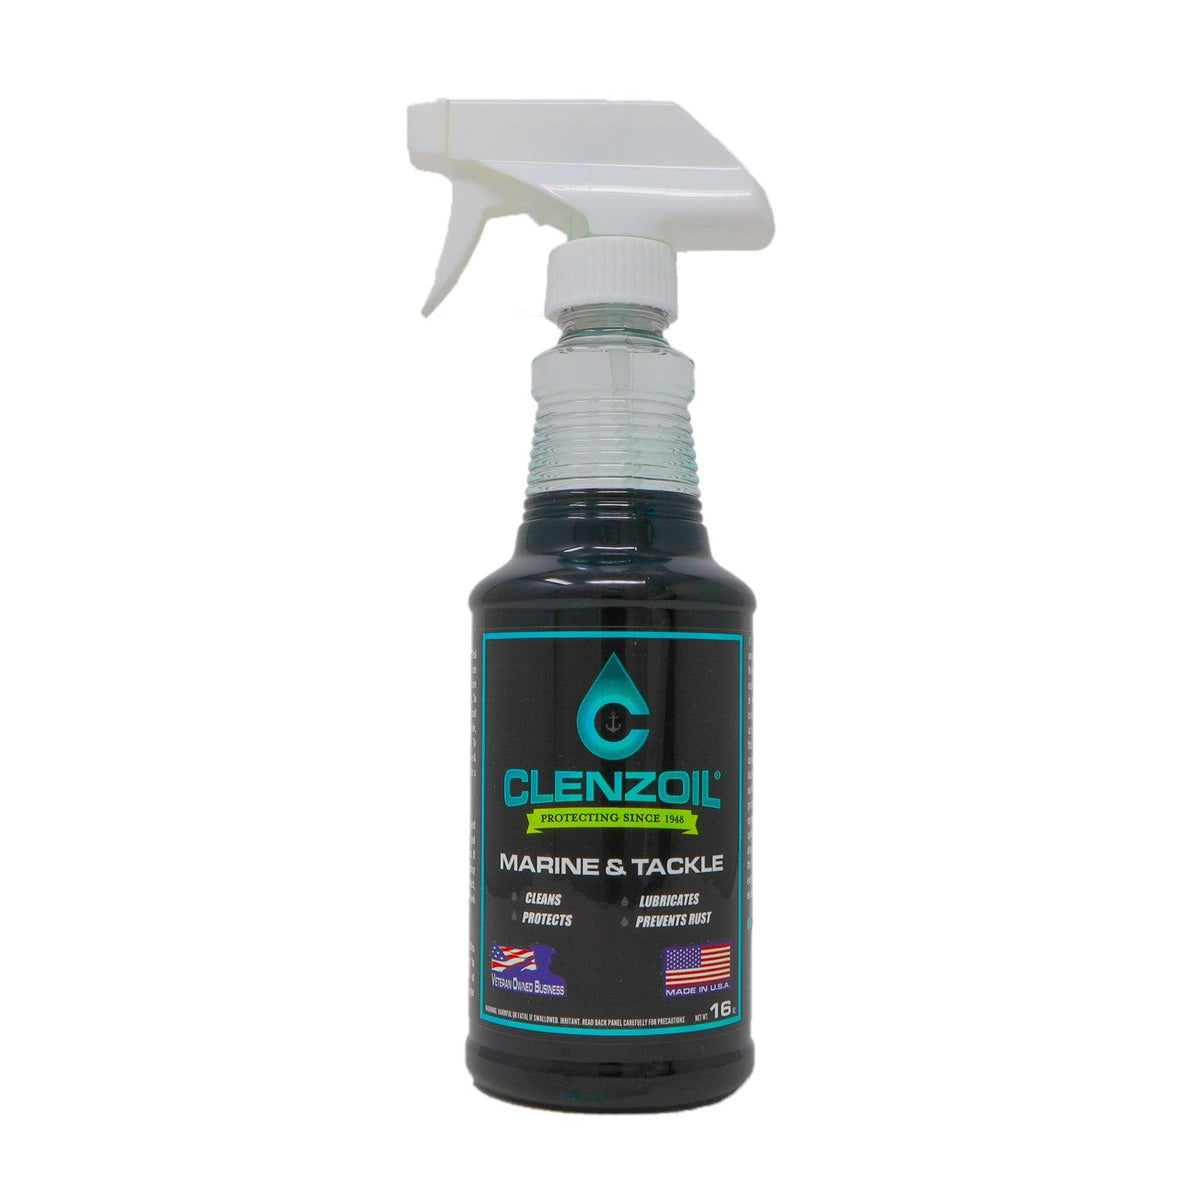 Clenzoil Marine & Tackle Lubricant and Rust Preventive (Size: 12oz